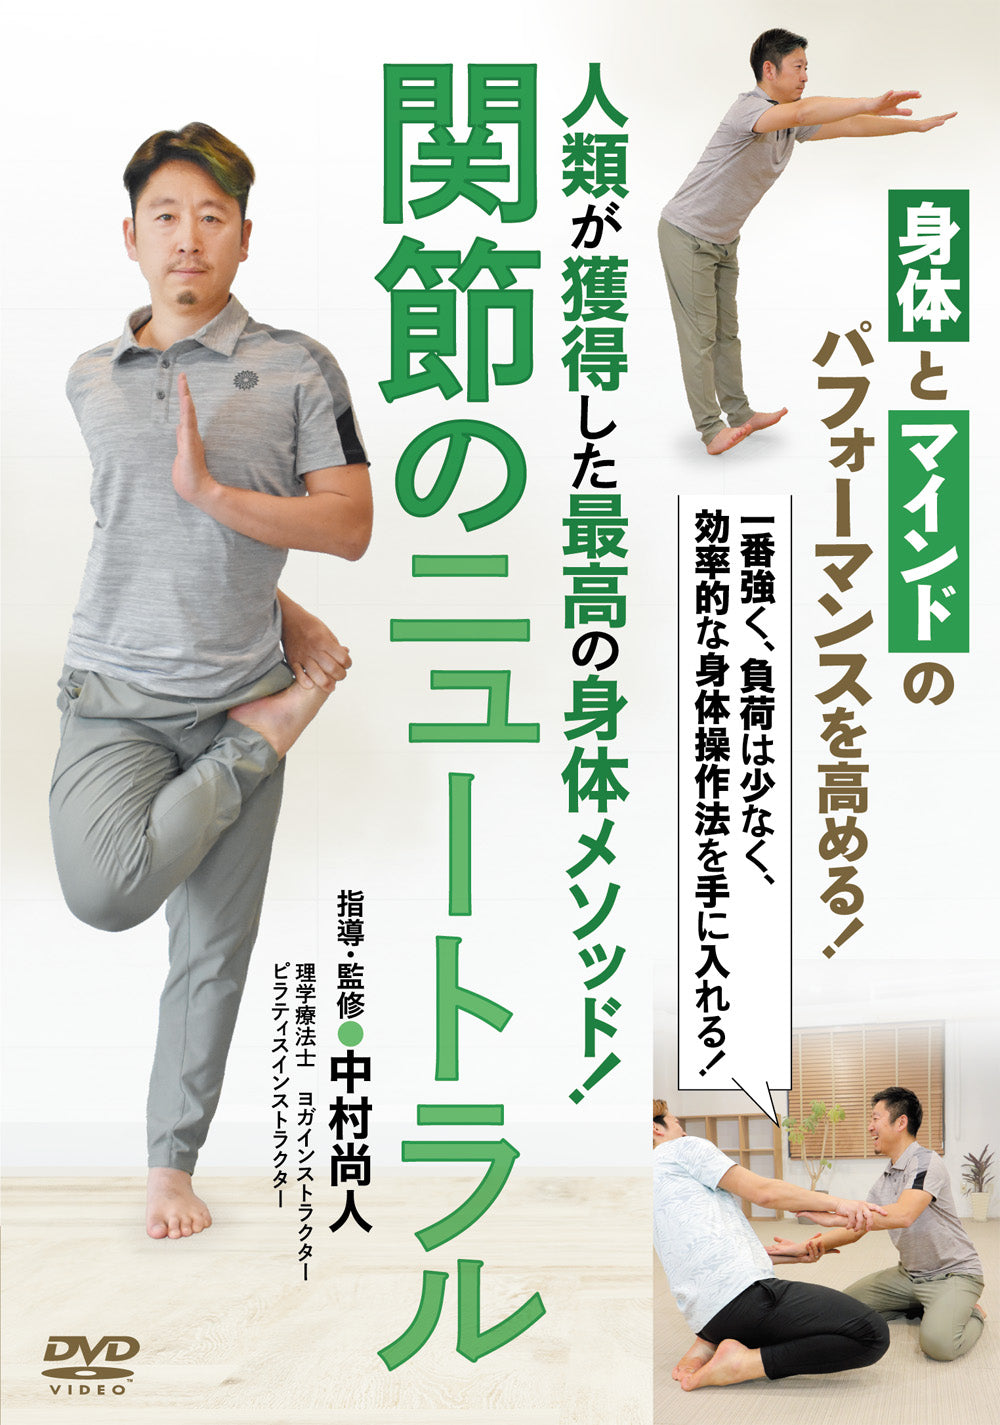 Joint Neutral DVD by Naoto Nakamura